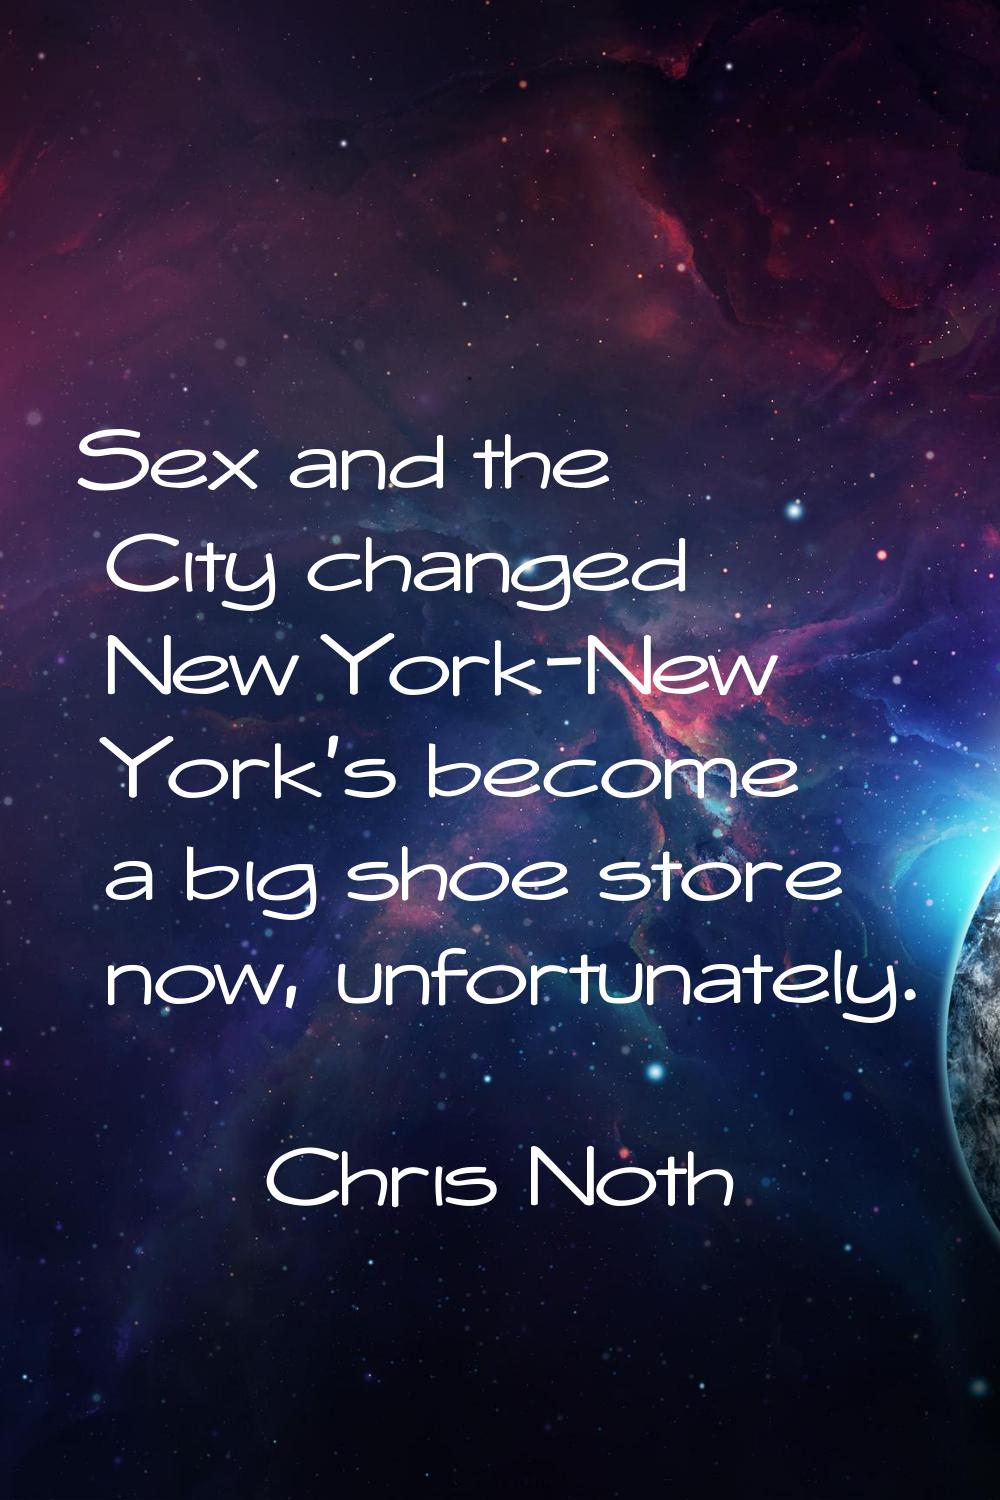 Sex and the City changed New York-New York's become a big shoe store now, unfortunately.